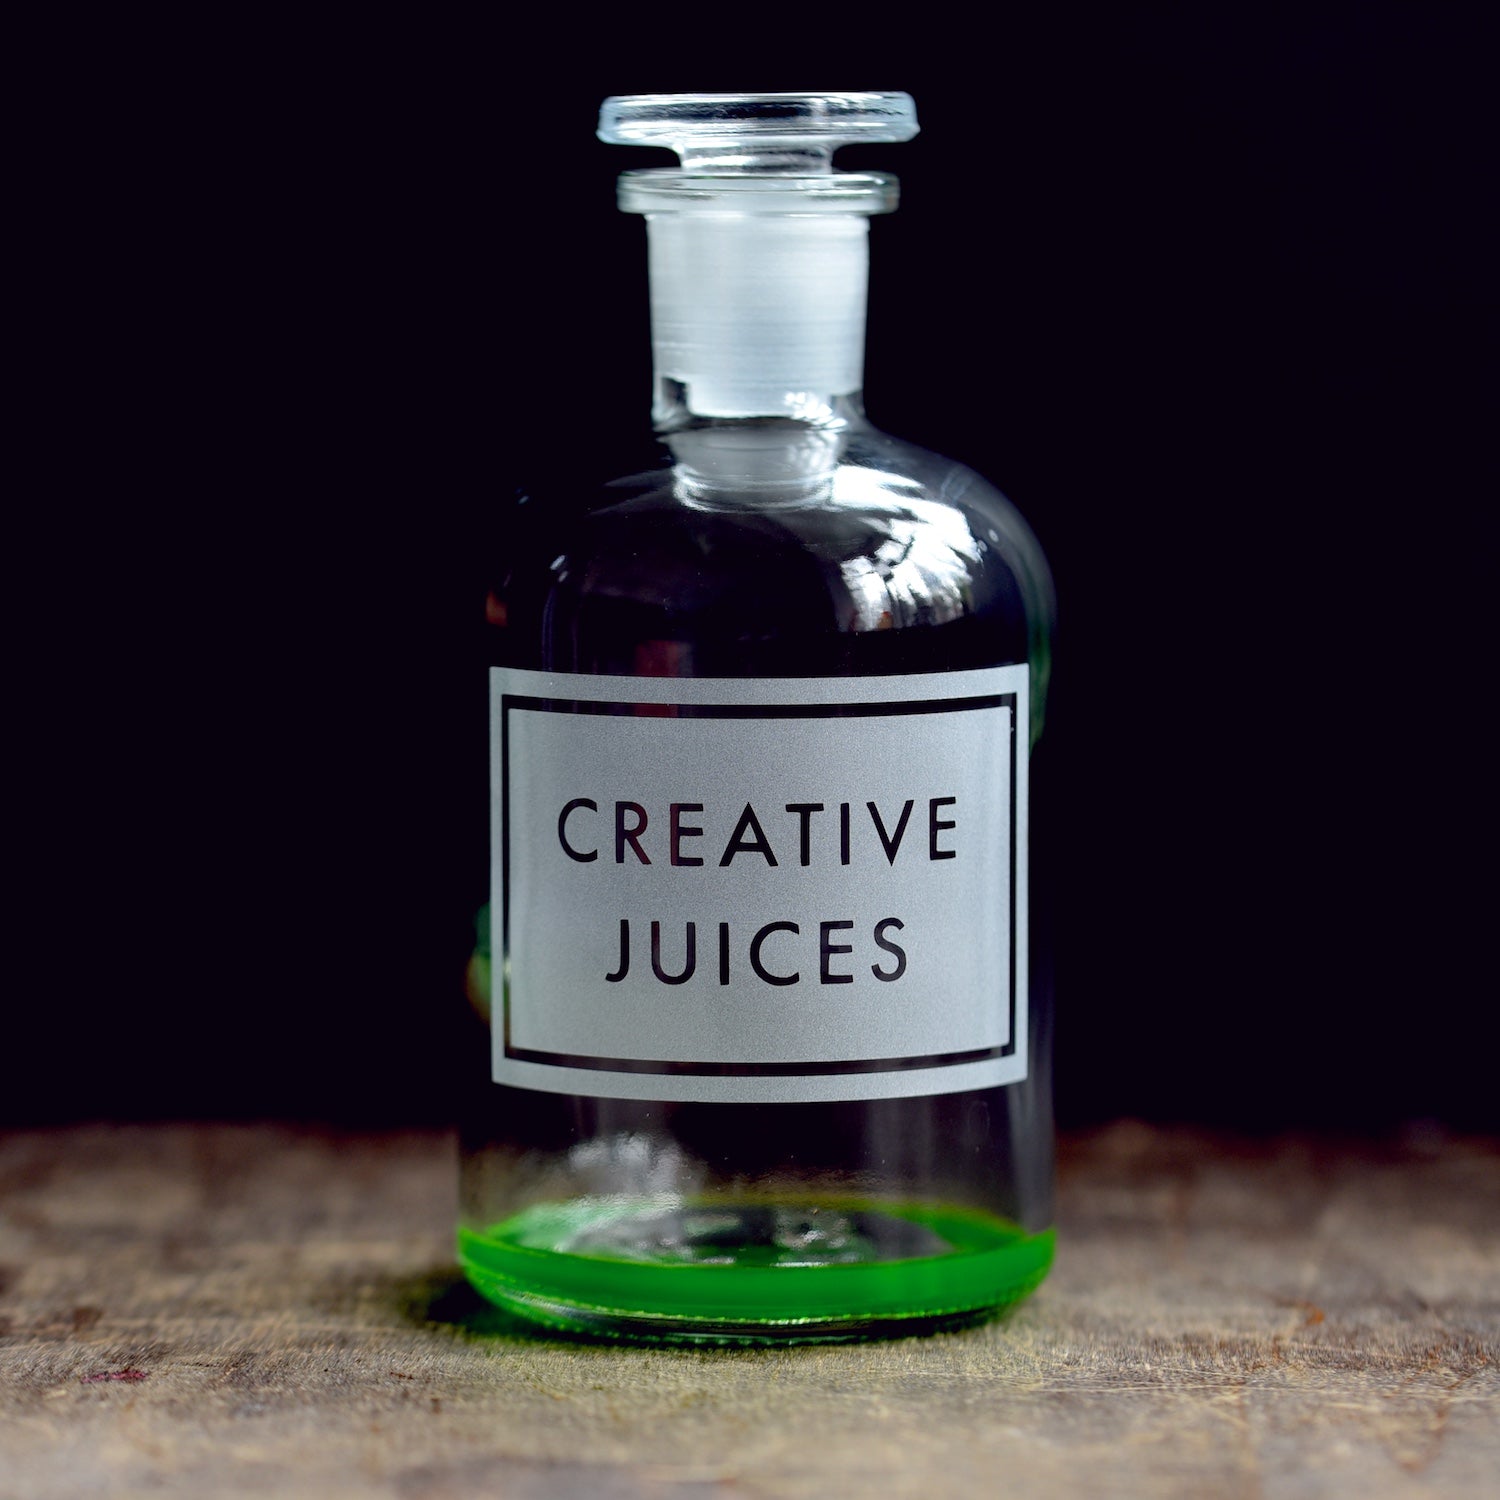 Creative Juices Glass Bottle Drumgreenagh Gift Shop